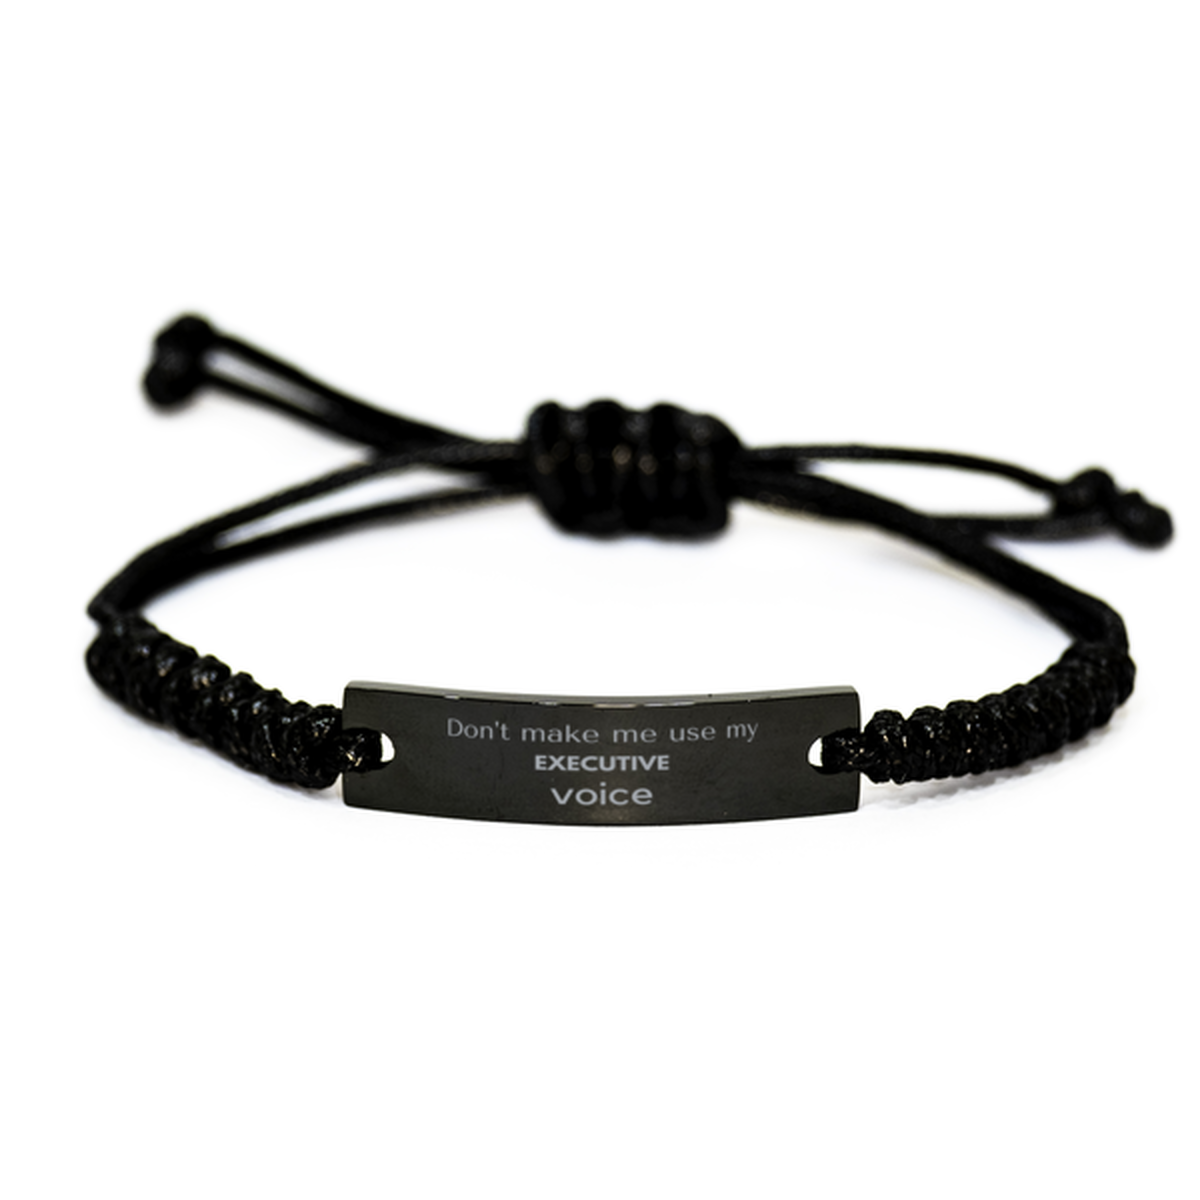 Don't make me use my Executive voice, Sarcasm Executive Gifts, Christmas Executive Black Rope Bracelet Birthday Unique Gifts For Executive Coworkers, Men, Women, Colleague, Friends